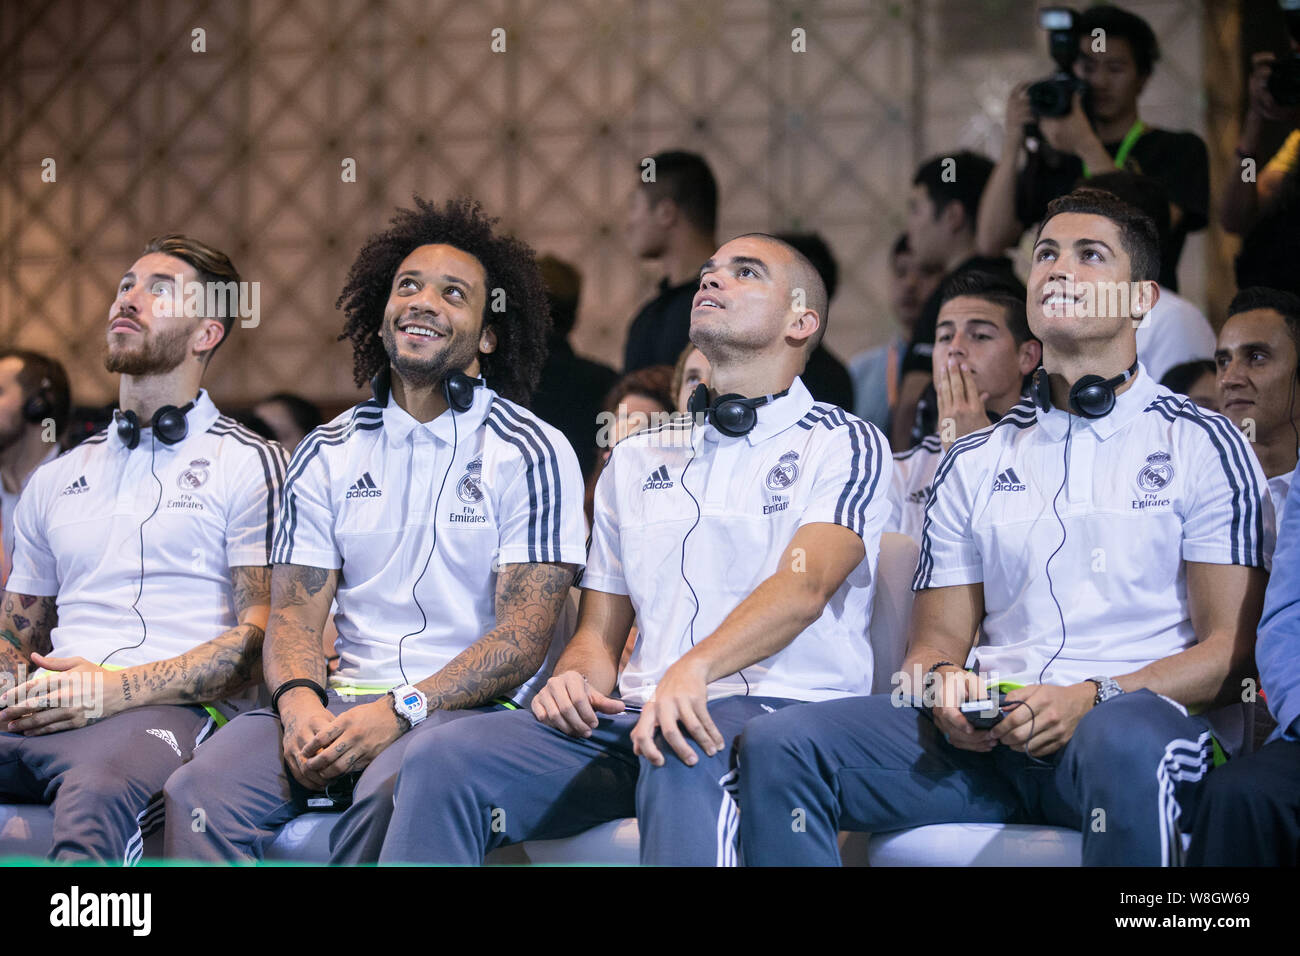 (From left) Sergio Ramos, Marcelo Vieira, Pepe and Cristiano Ronaldo of Real Madrid attend a press conference for the strategic cooperation between Re Stock Photo